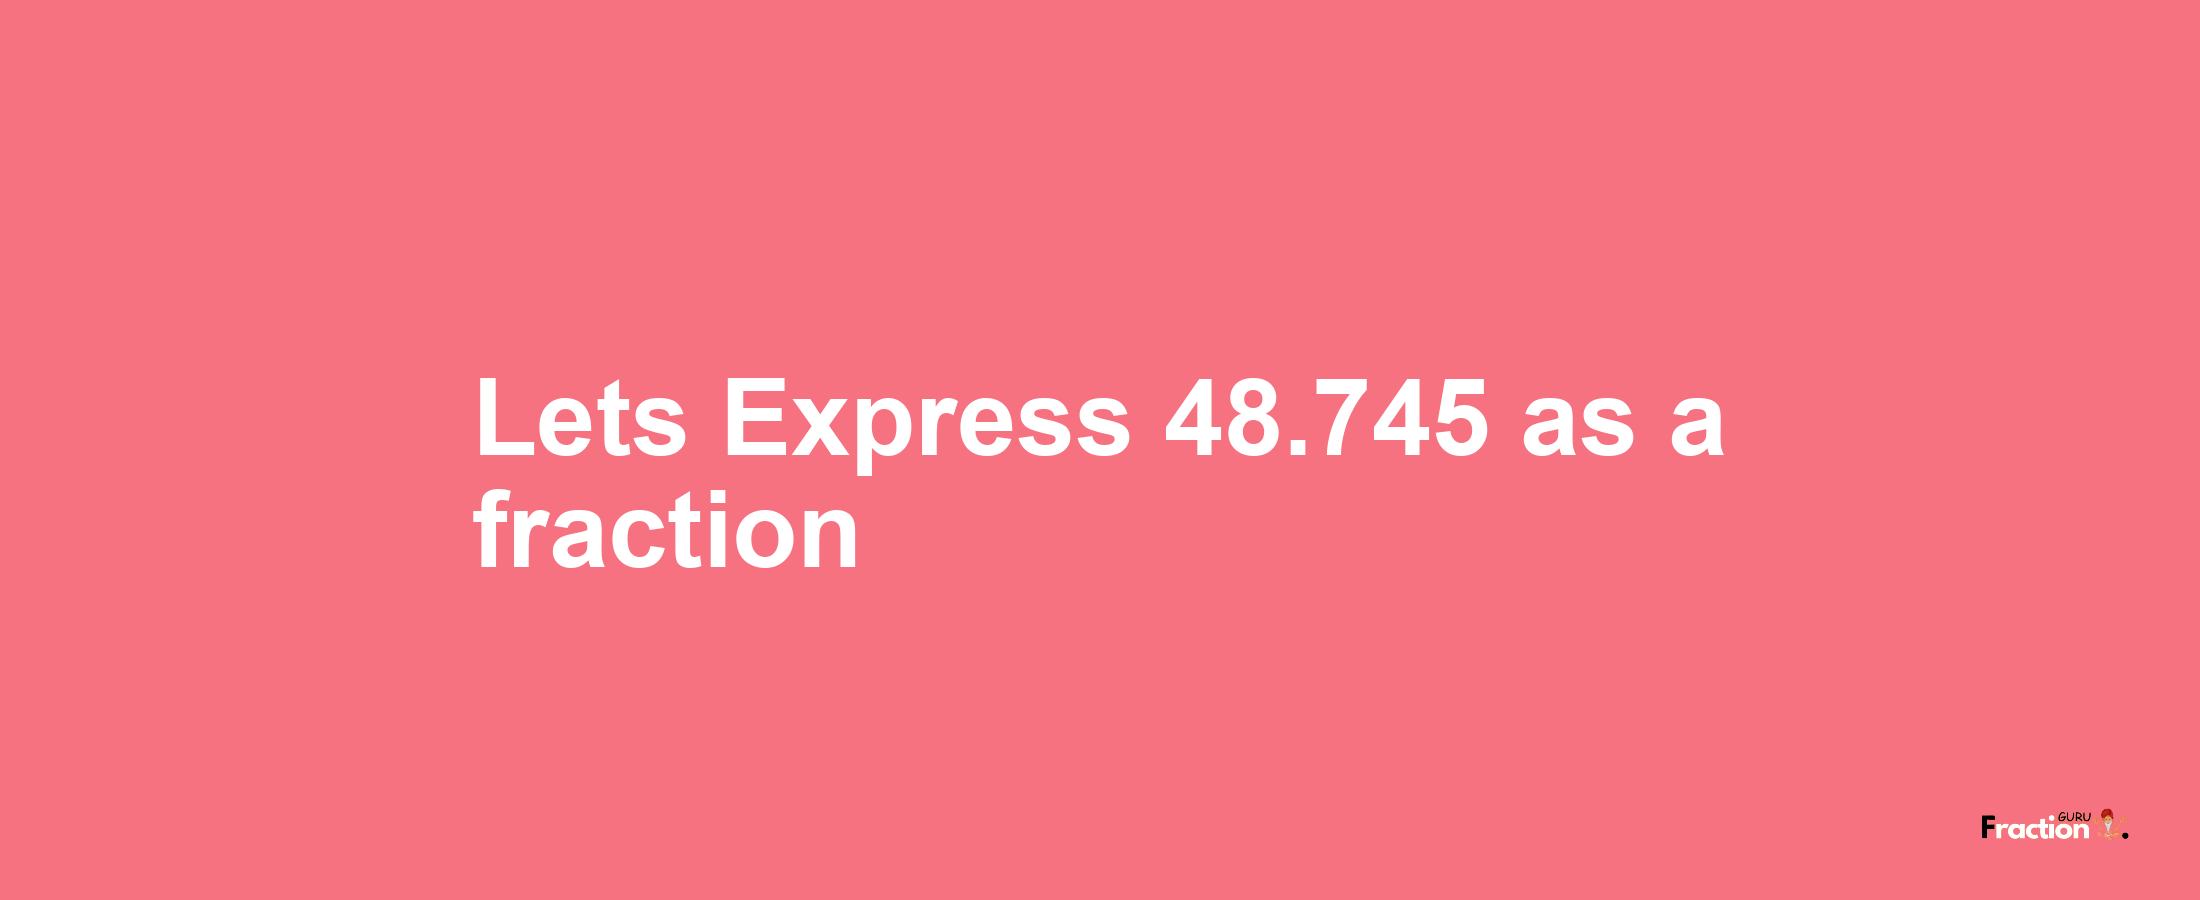 Lets Express 48.745 as afraction